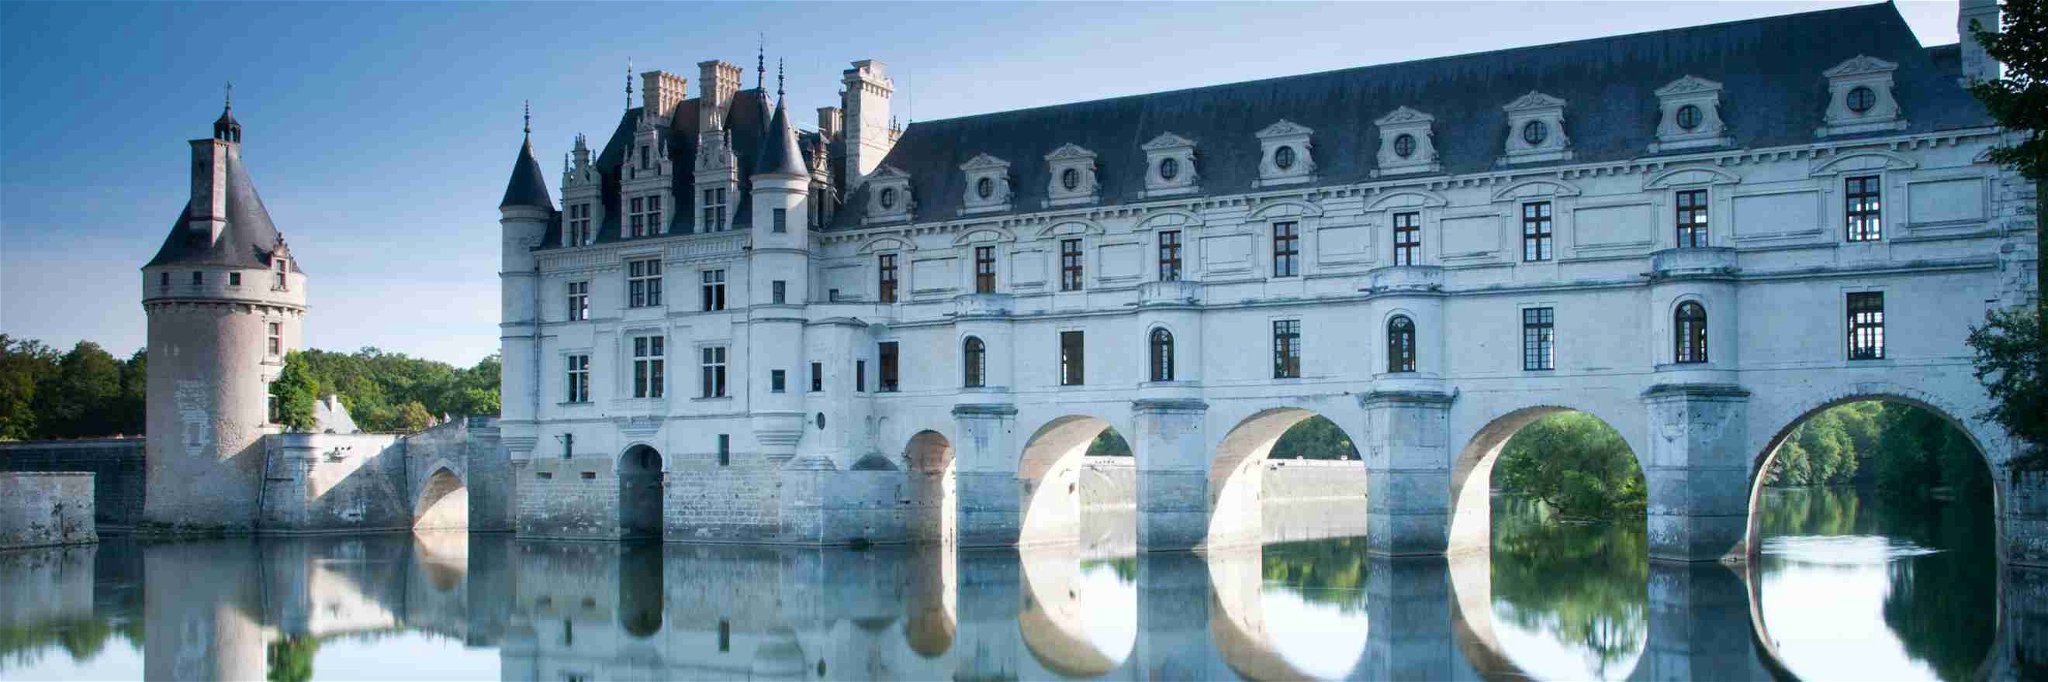 Château de Chenonceau in the Loire Valley where Chenin Blanc is from.&nbsp;